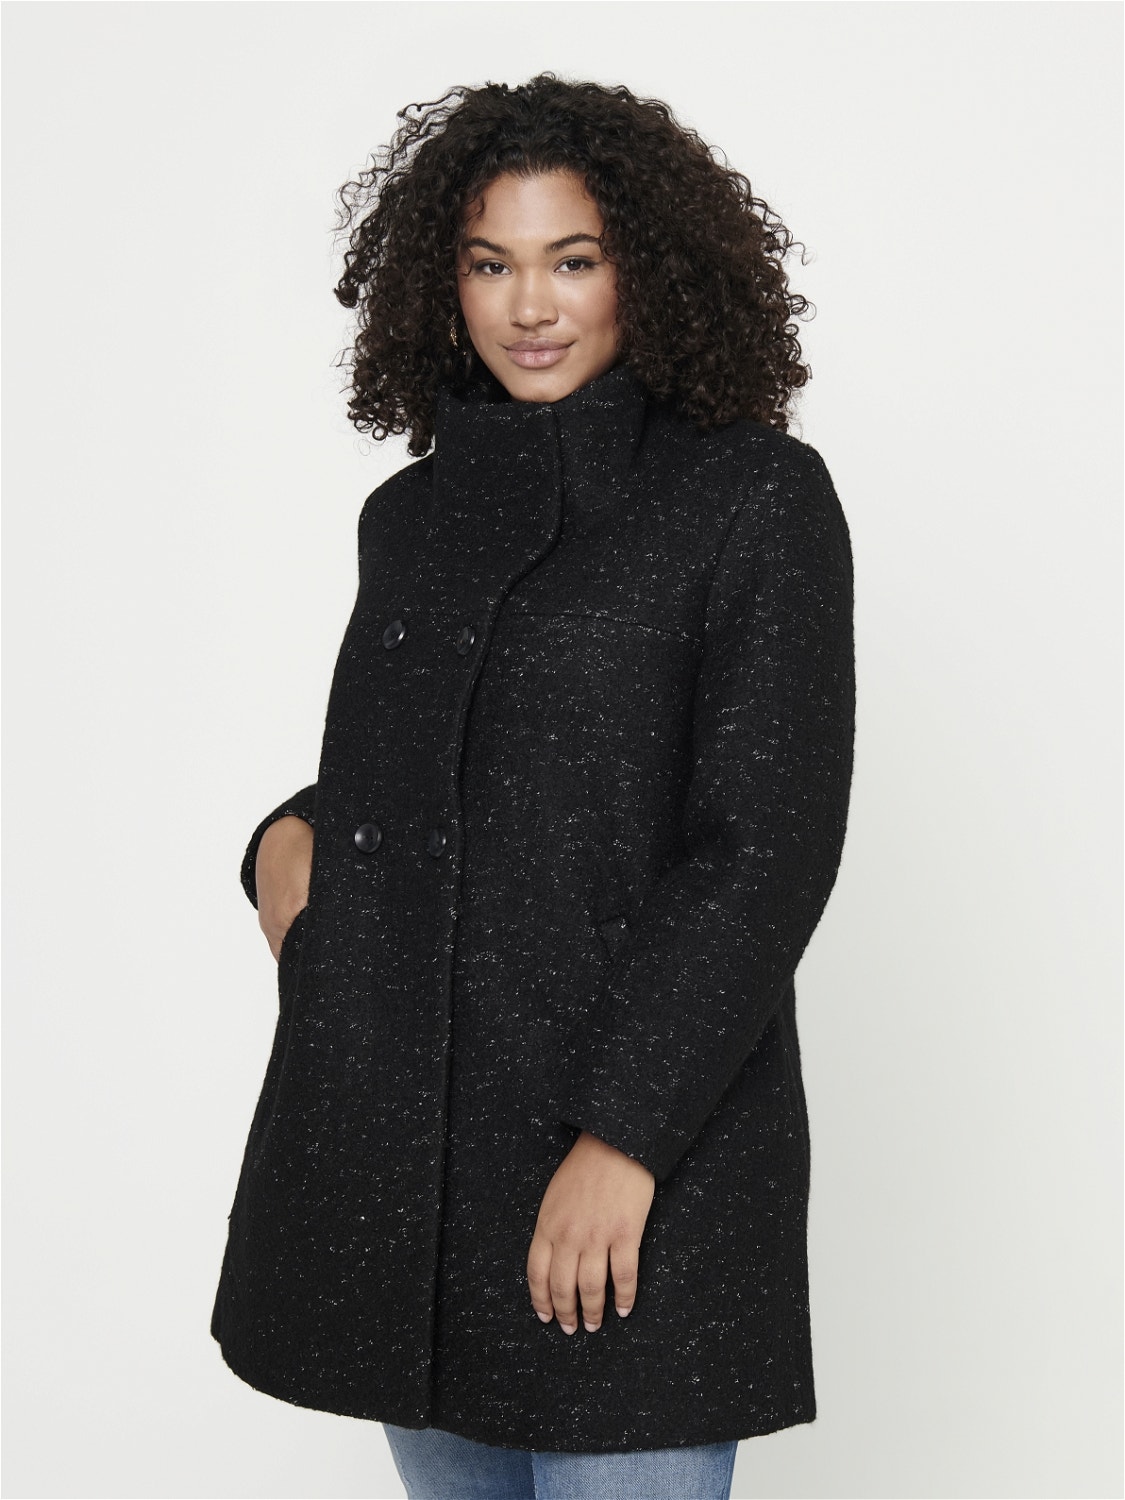 Curvy Wool Coat with 40% discount!